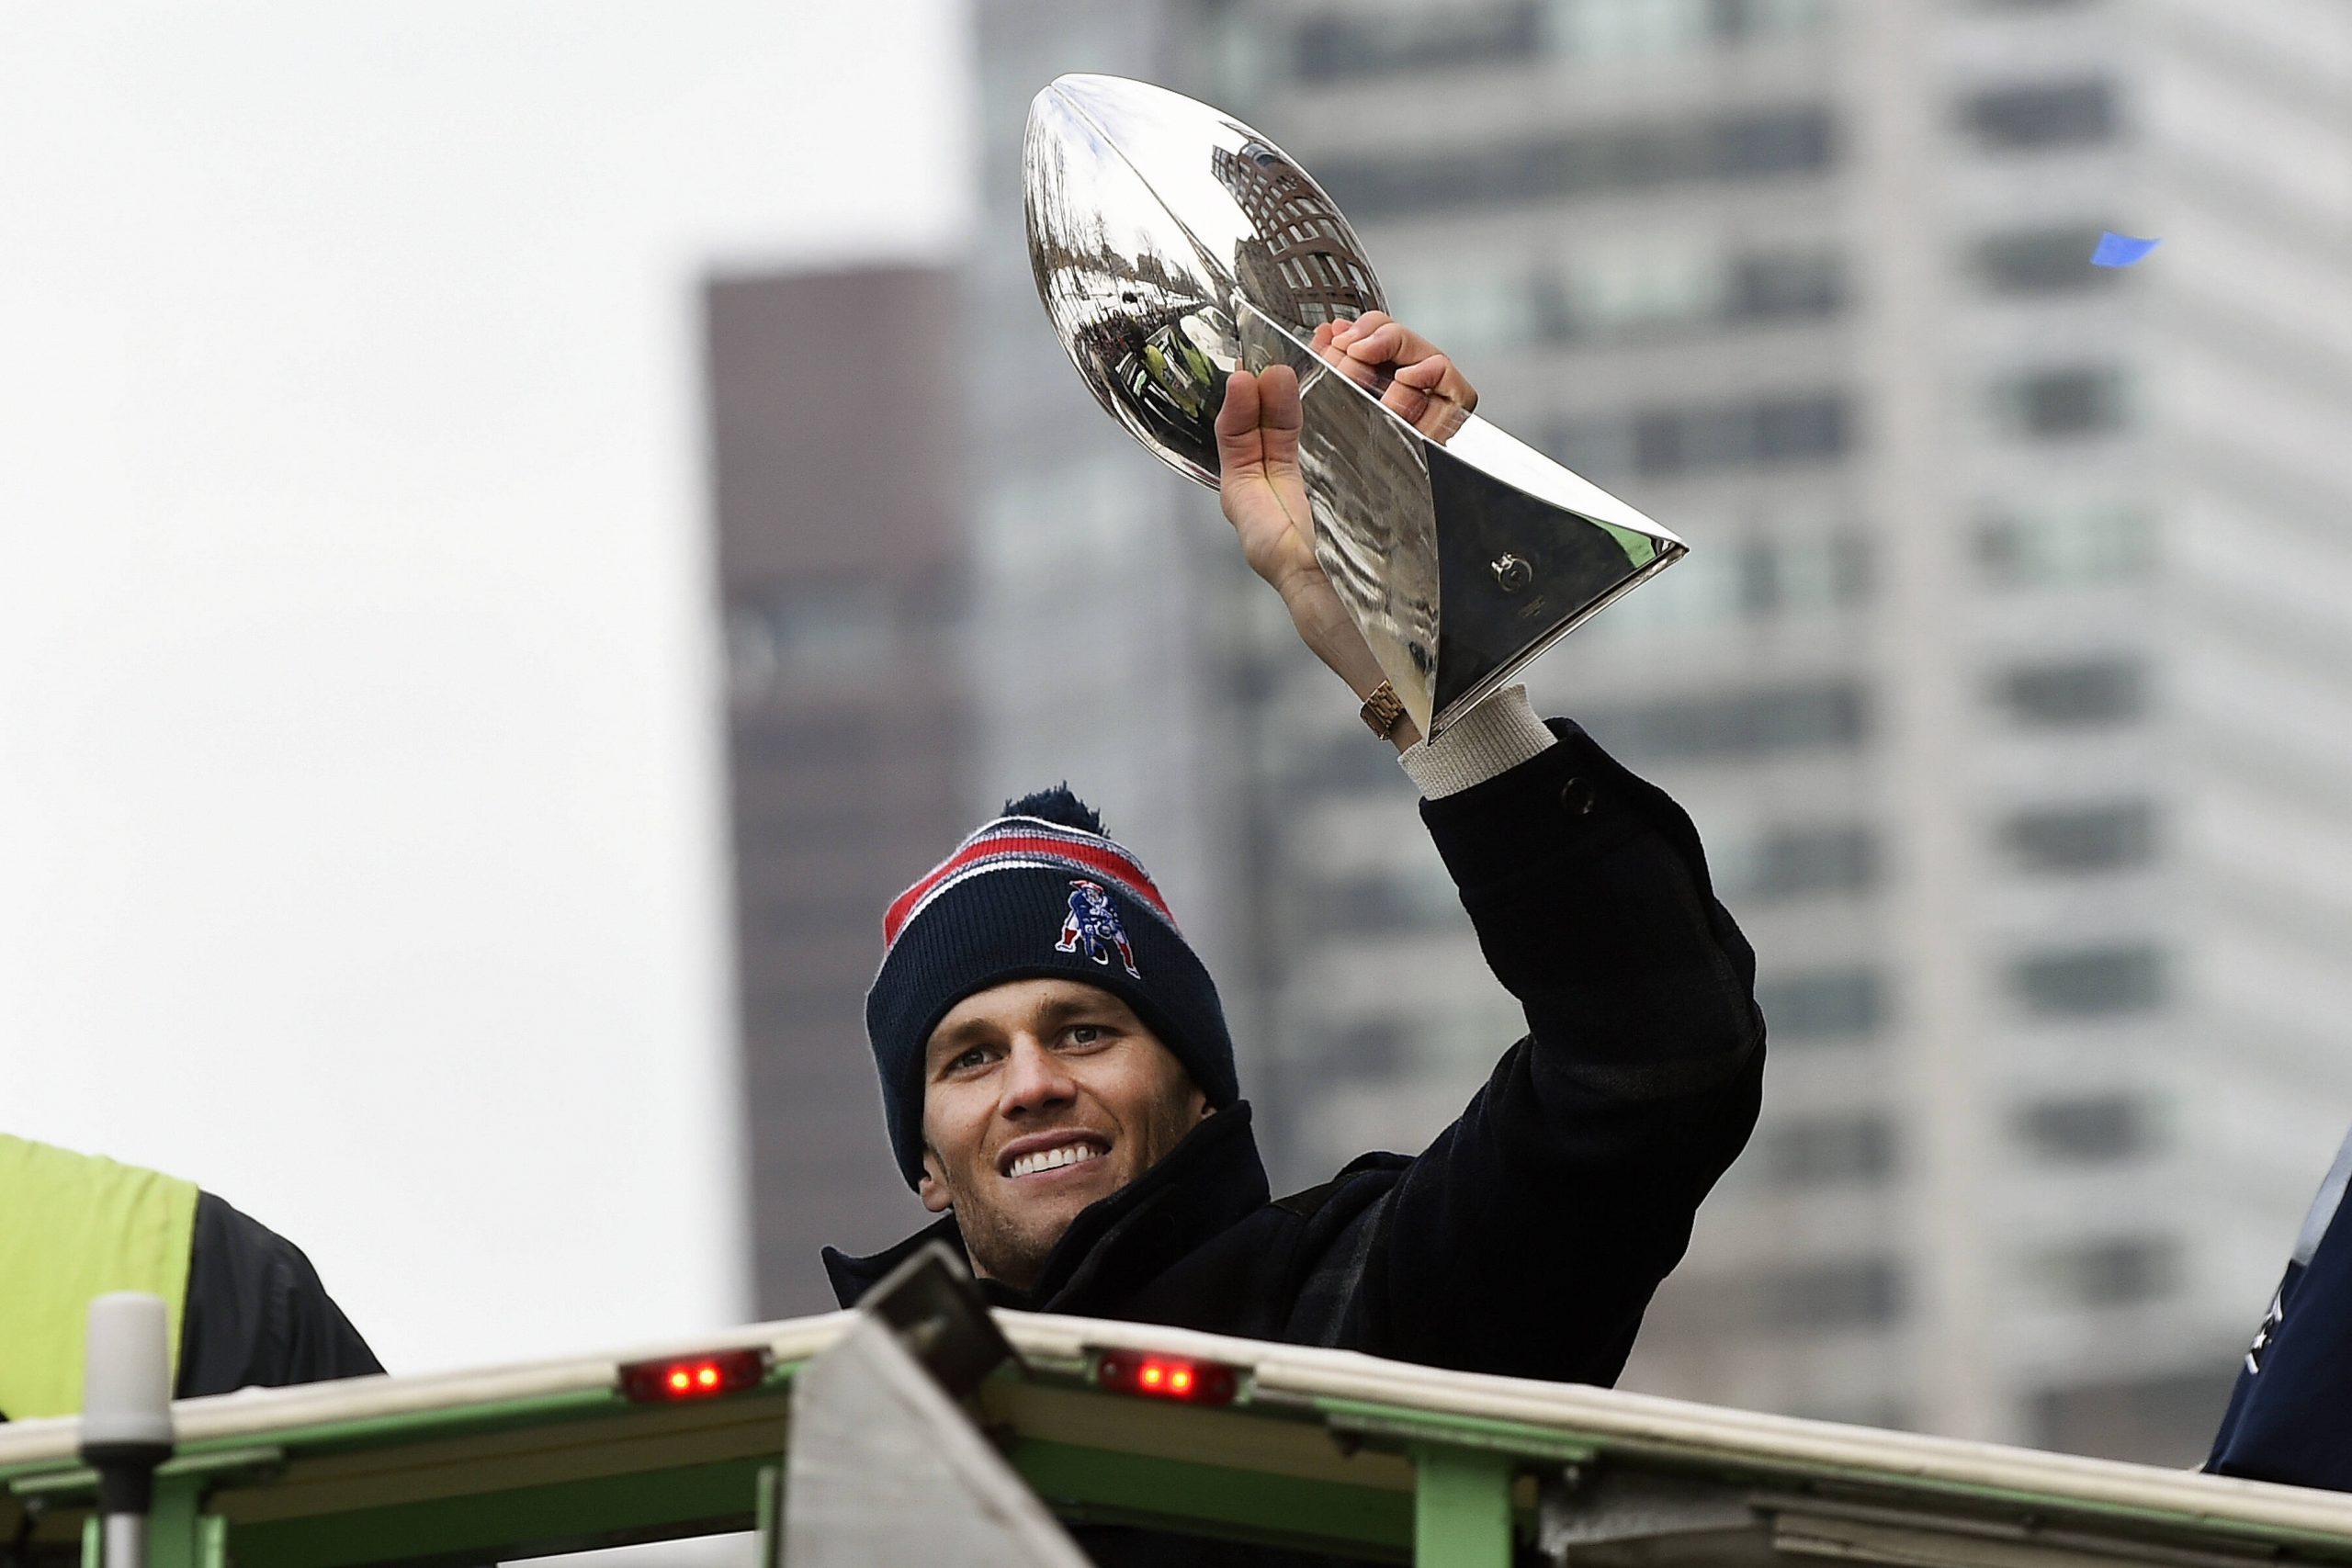 January 29, 2022: Multiple sources report that seven time Super Bowl Champion, Tom Brady, will announce his retirement f